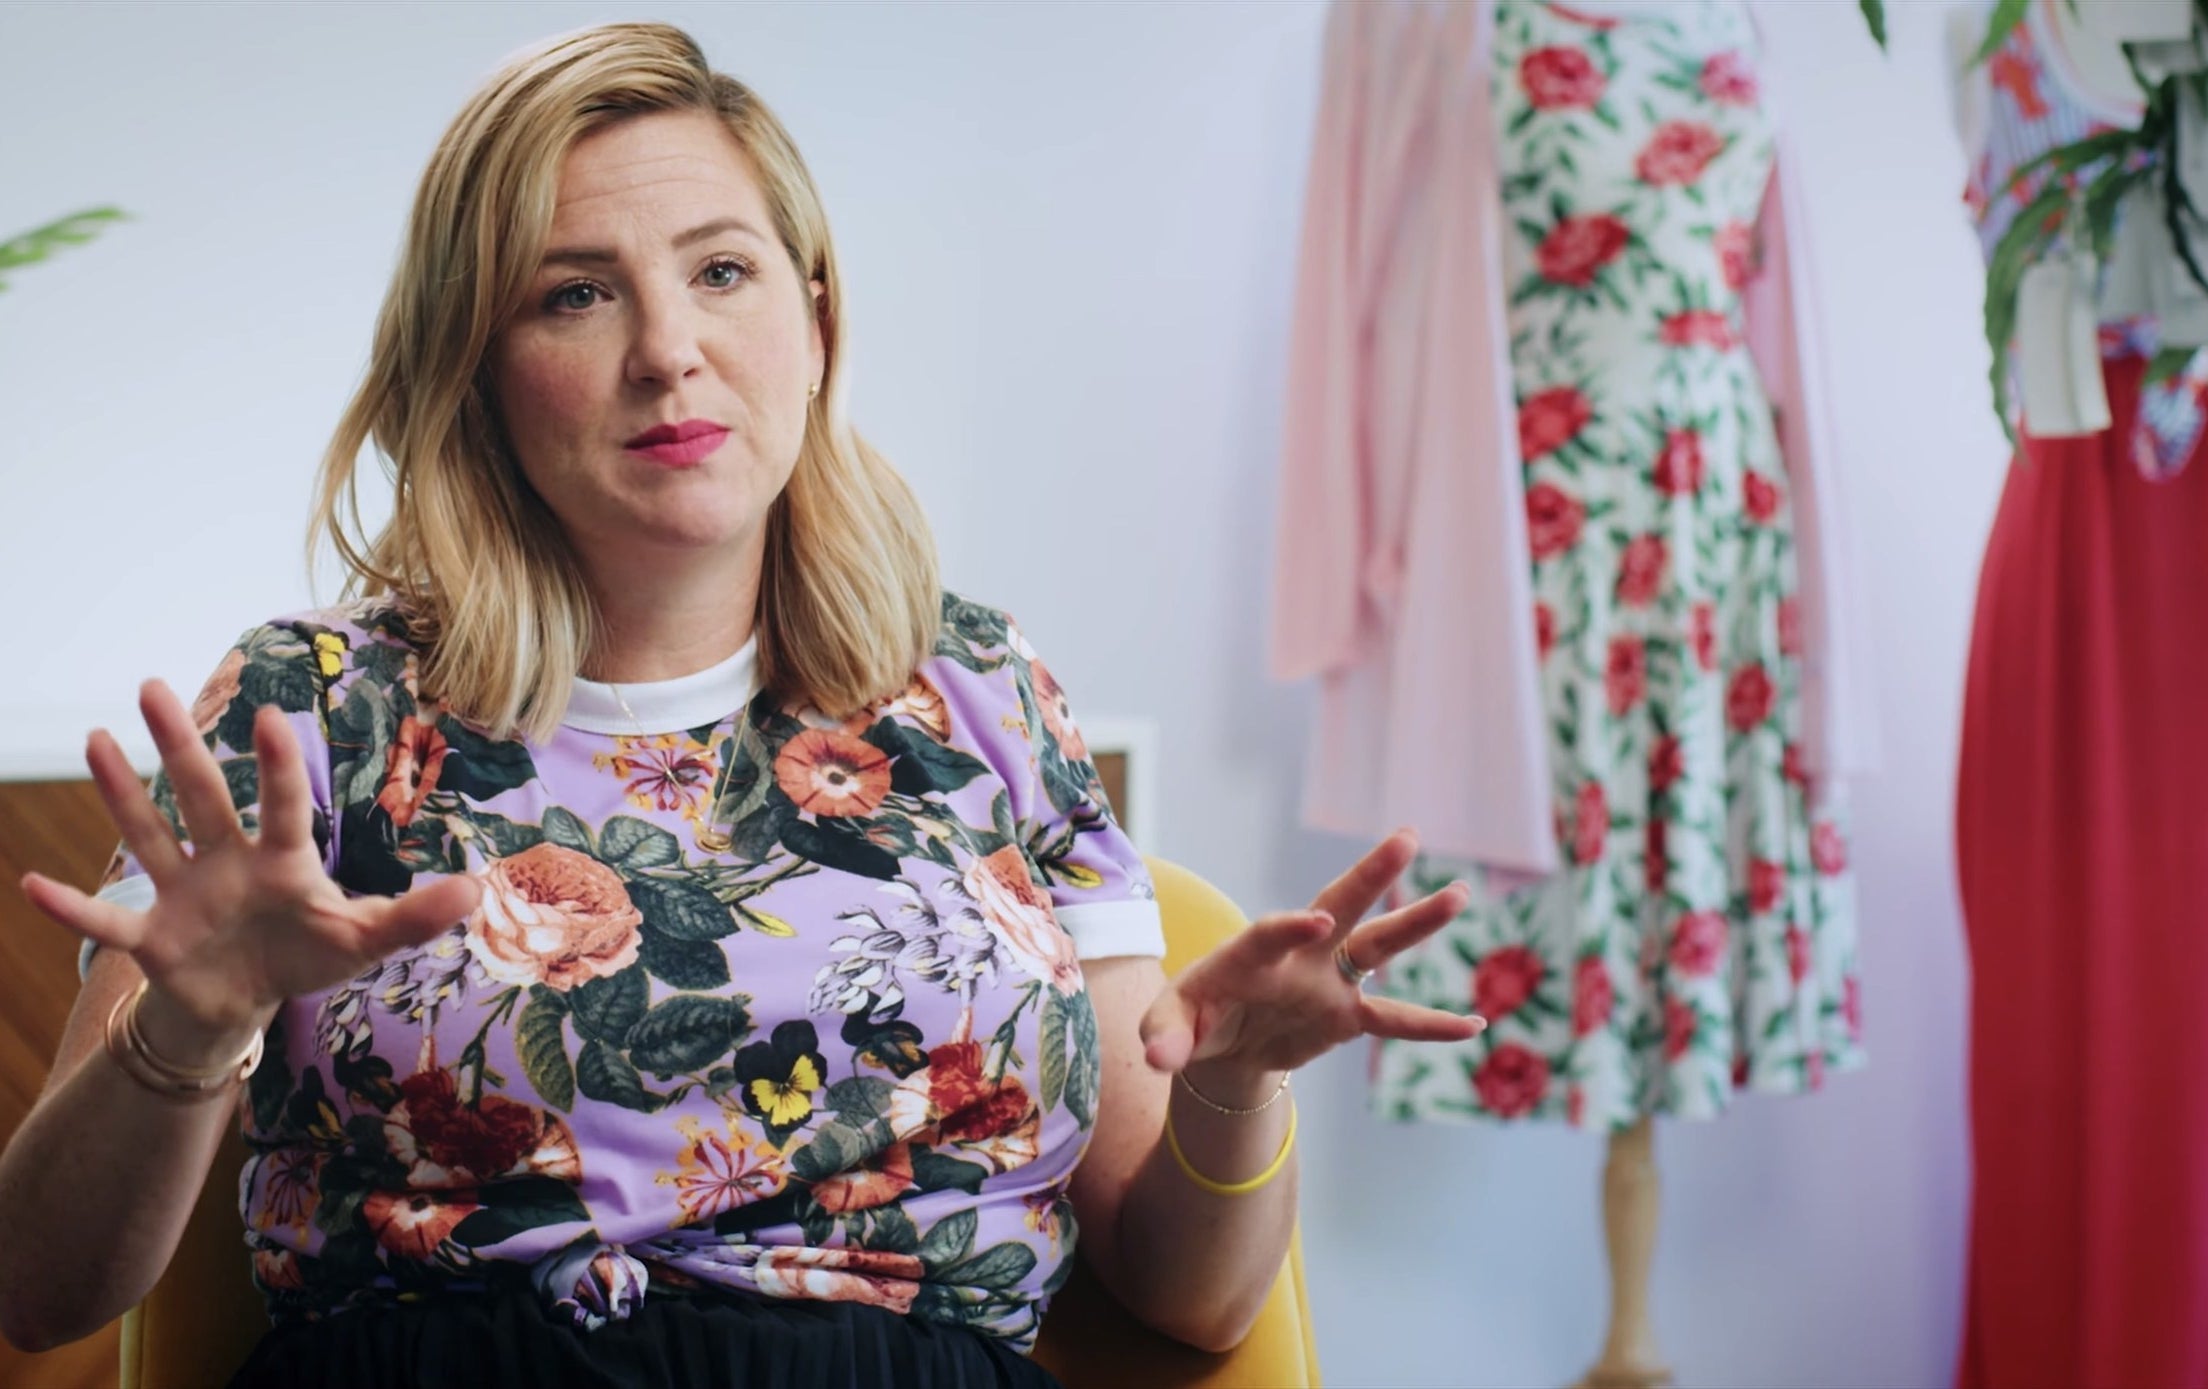 Top 9 facts about that addictive LuLaRoe fad